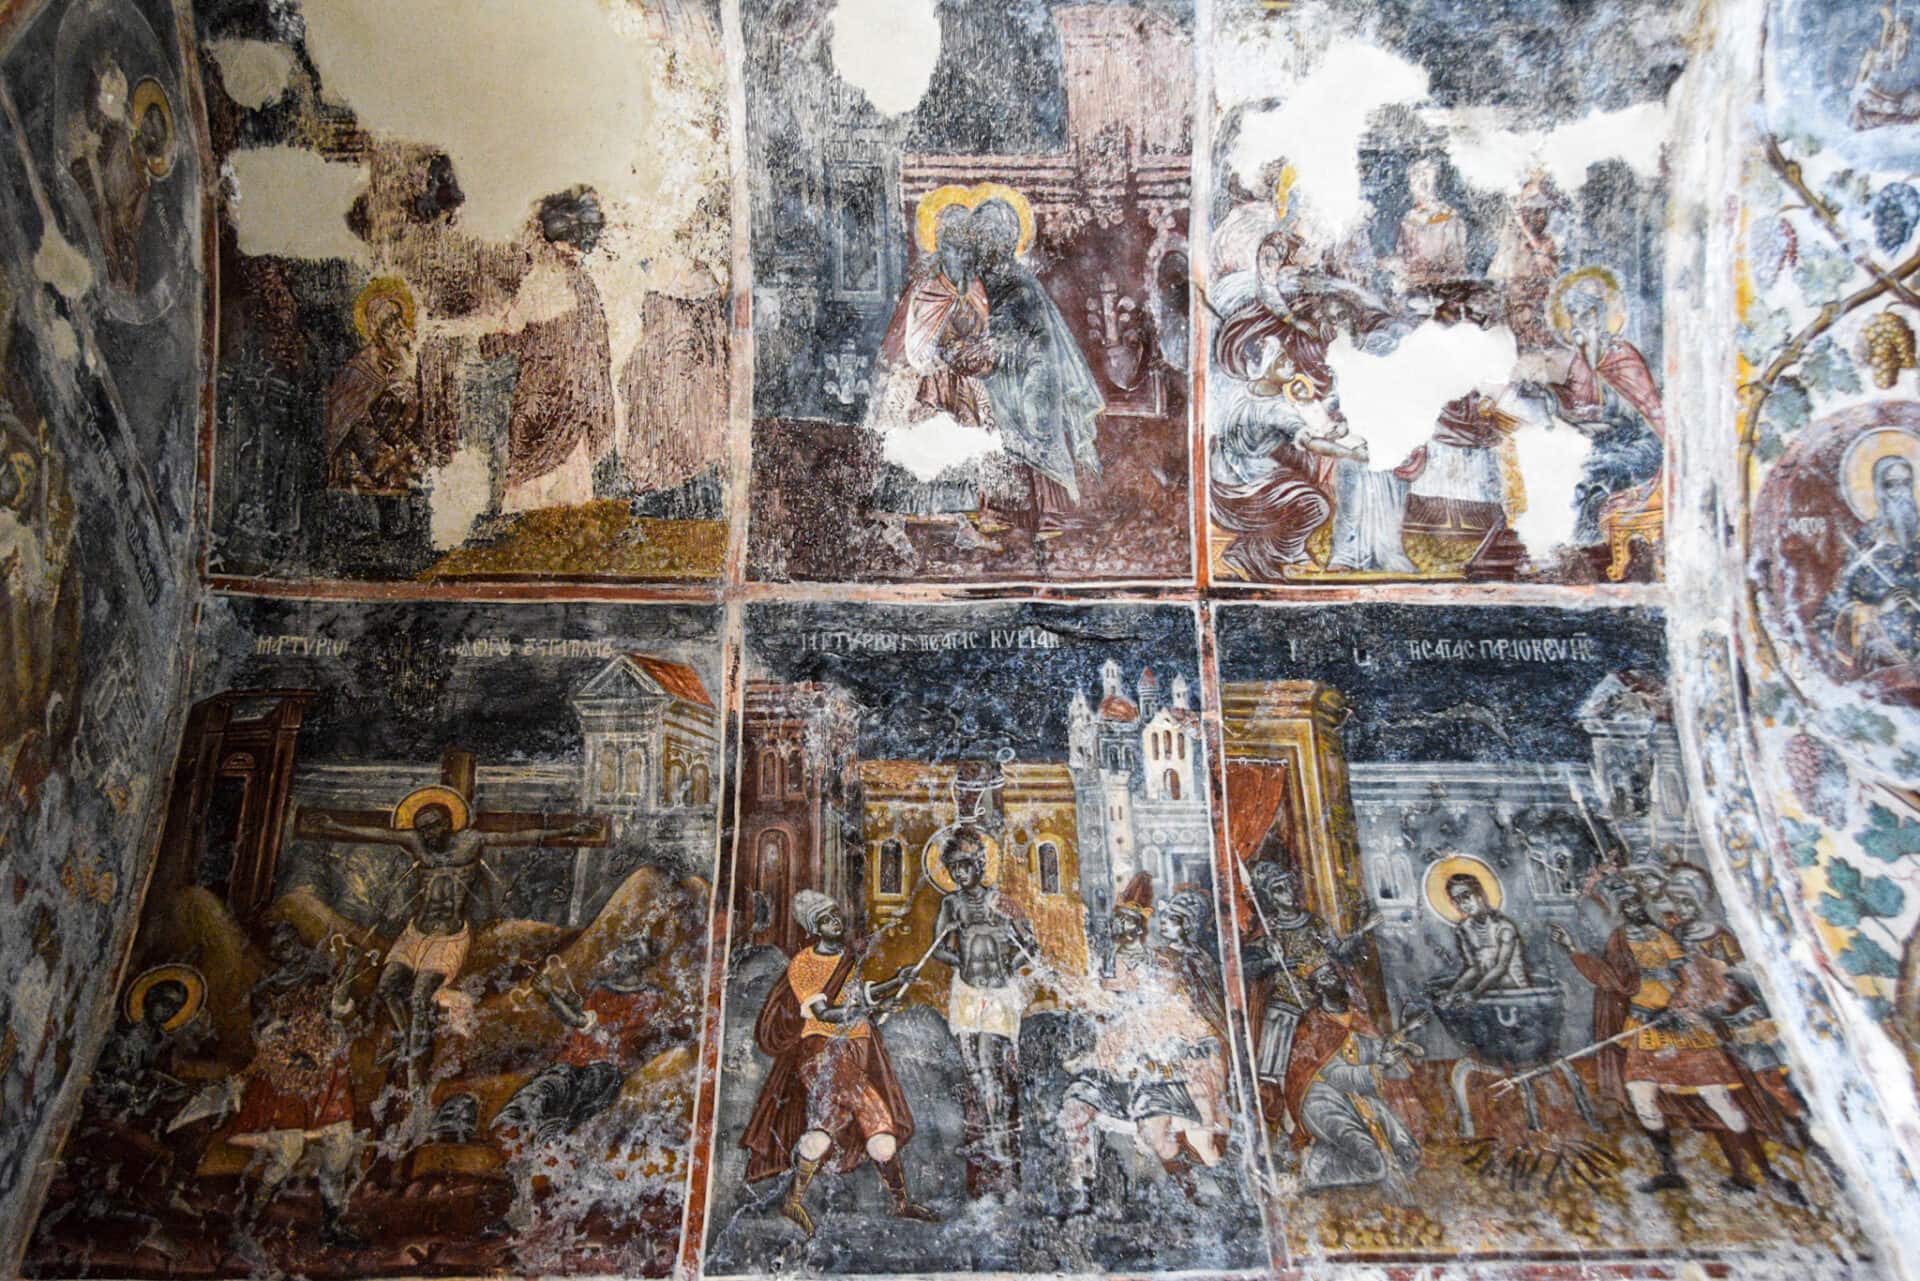 a series of colourful and graphic wall paintings depicting the brutal torture of Christian martyrs